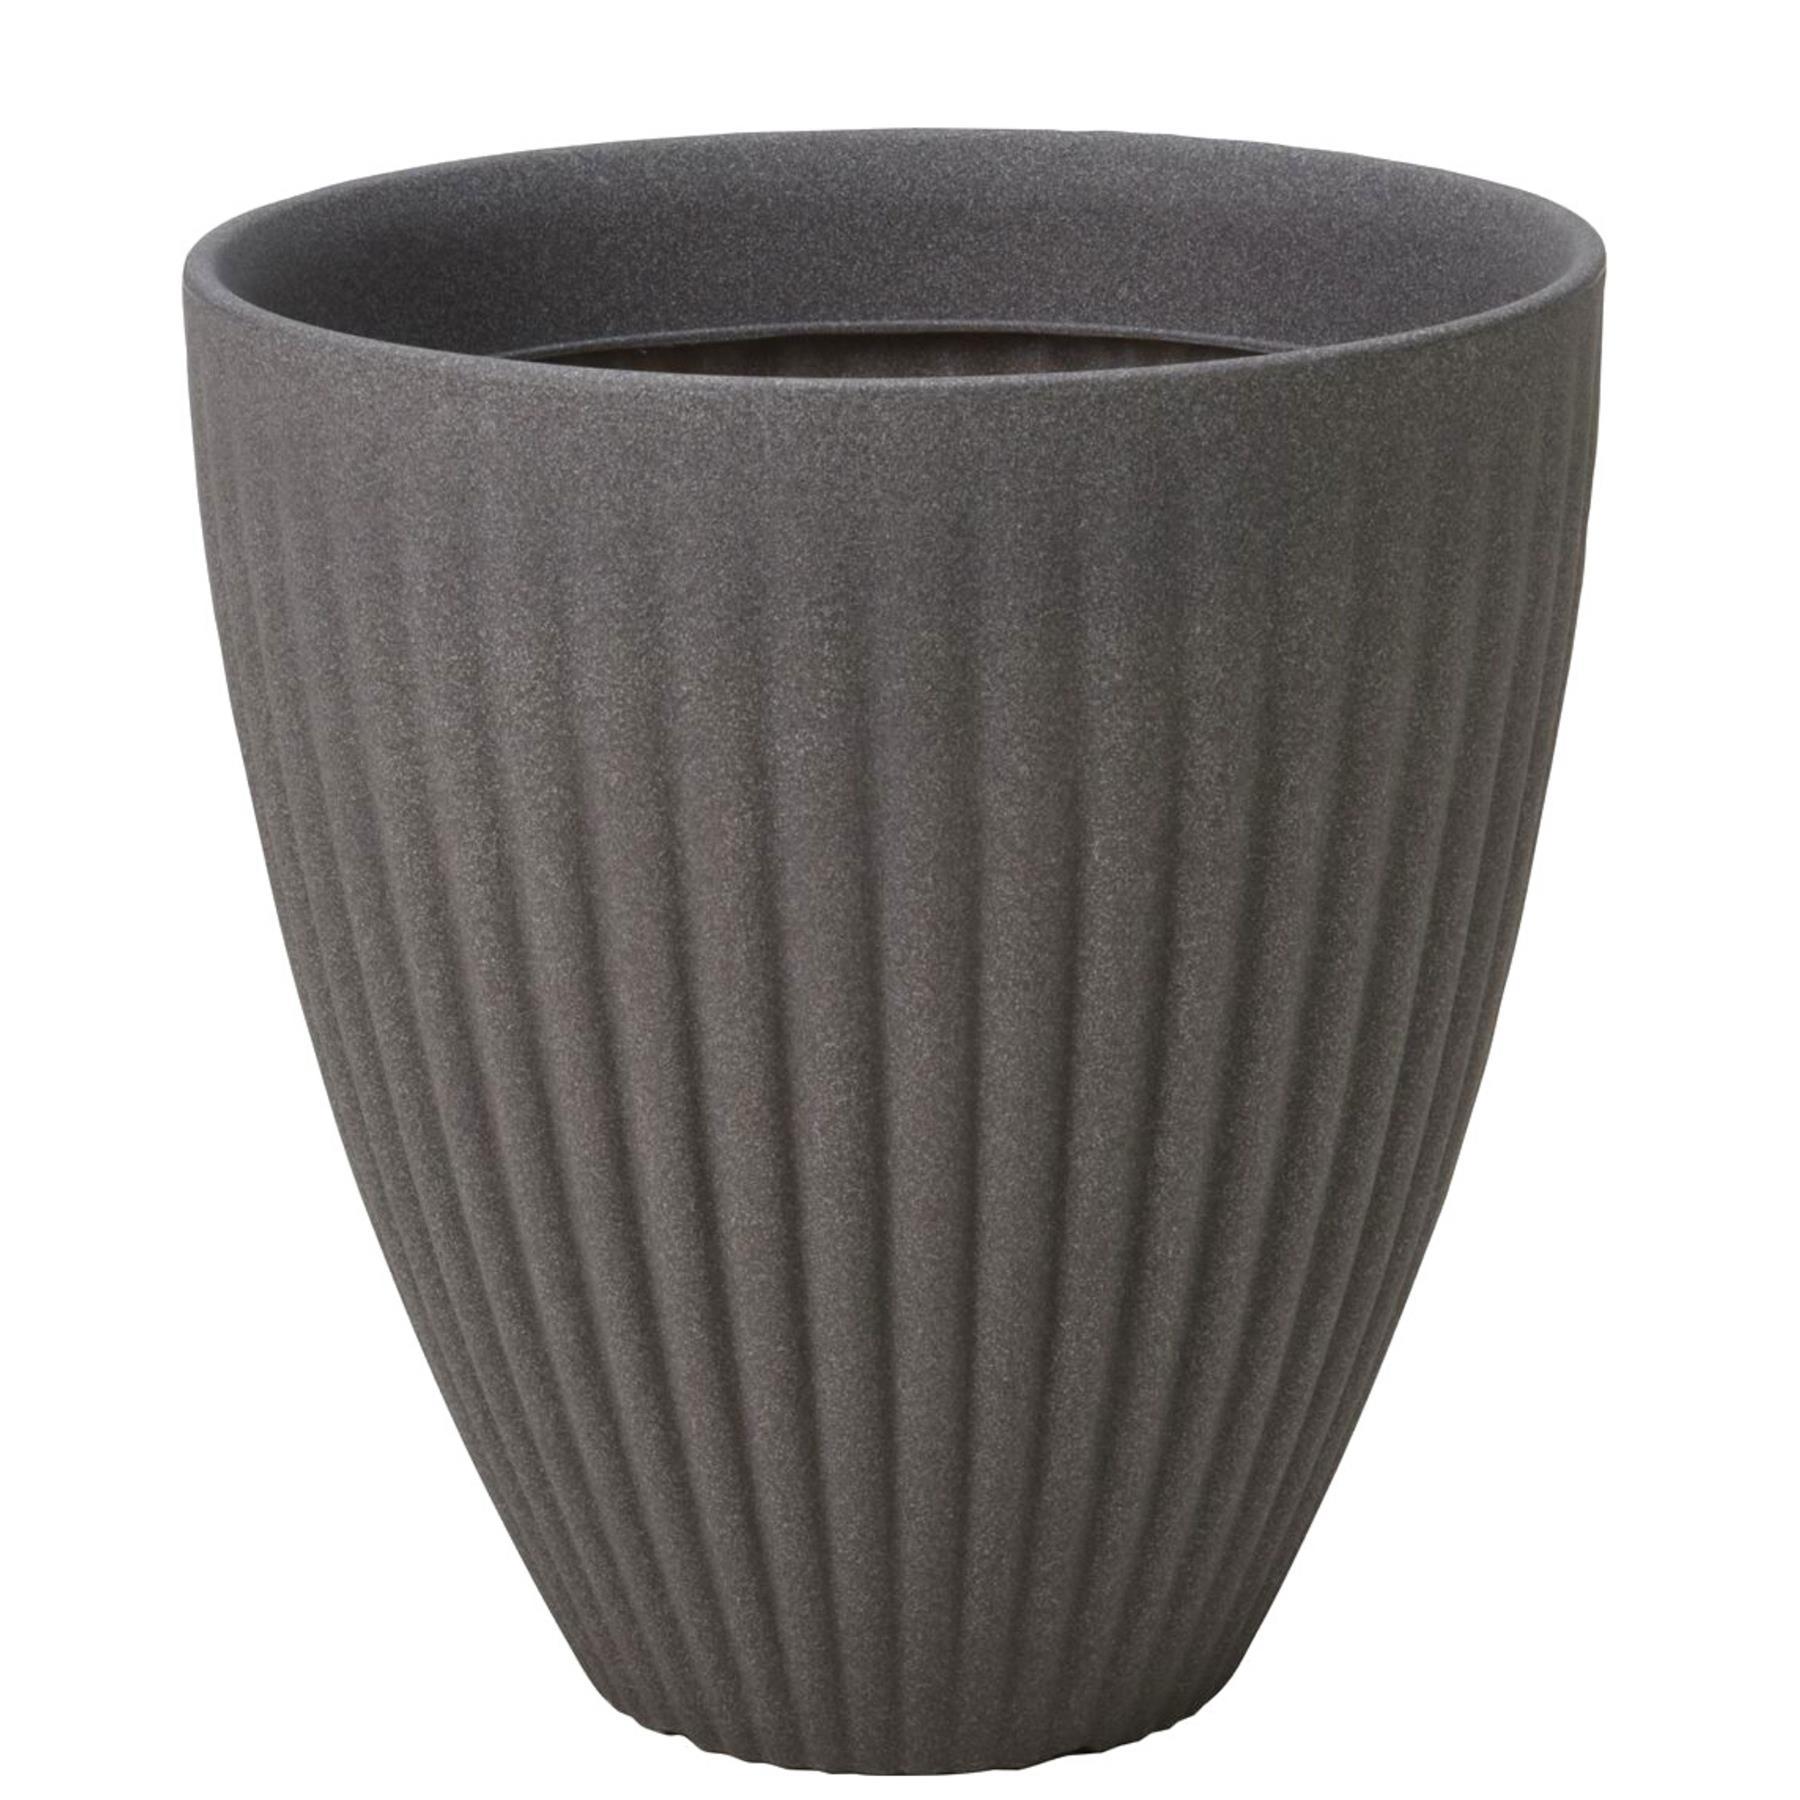 Large Grey Round Planter 42 cm GEEZY - The Magic Toy Shop